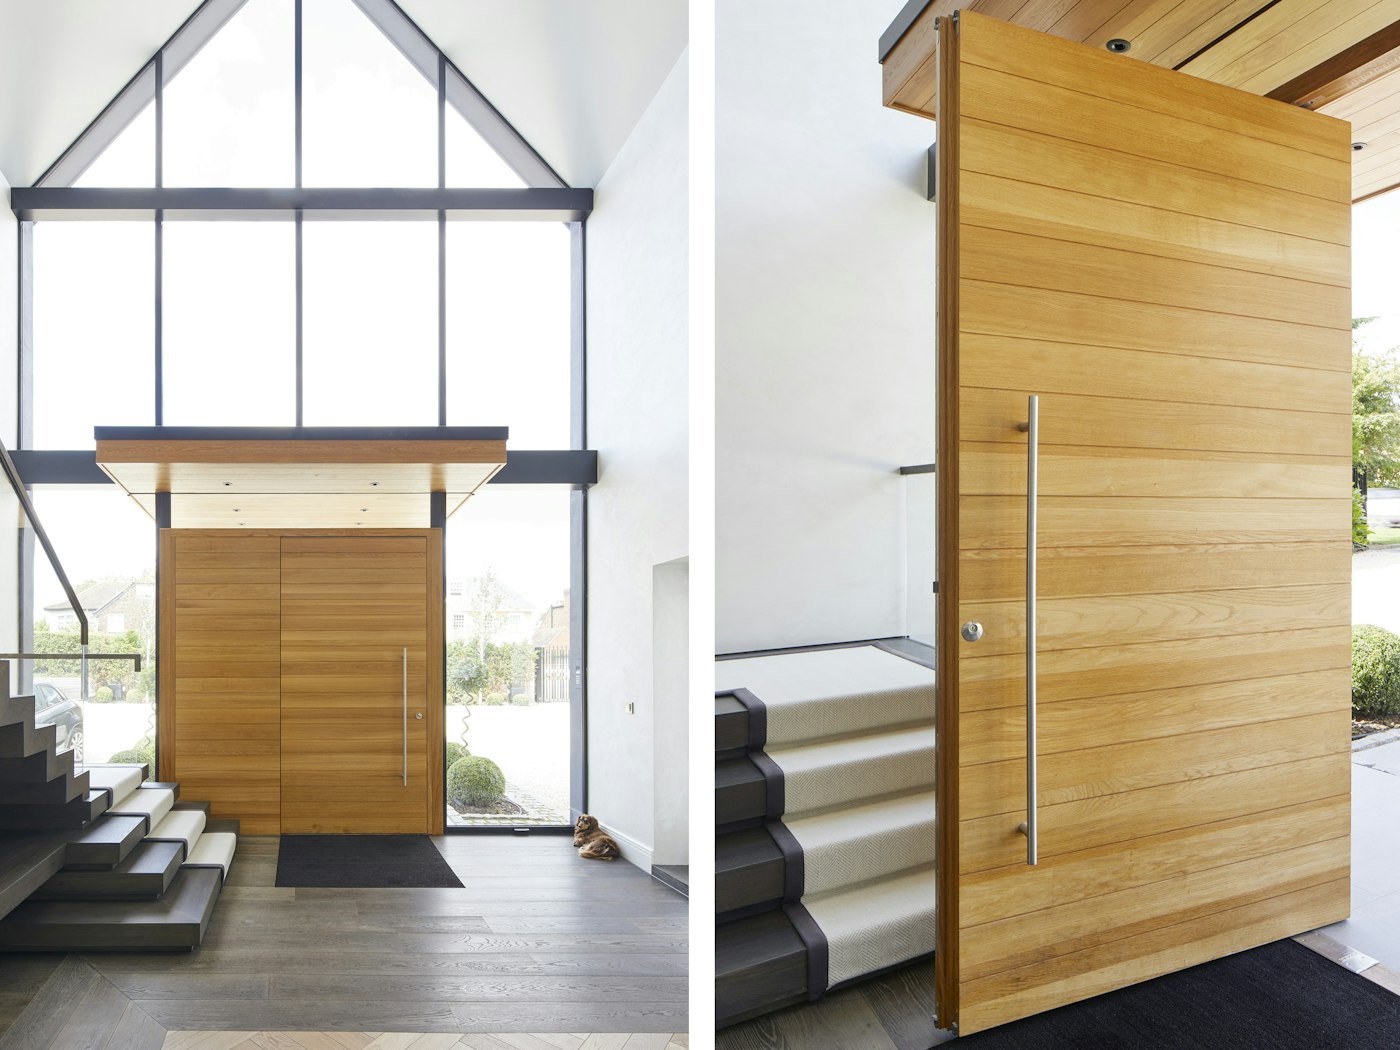 The glass allows the hall to be flooded with light, the door is fitted with an option 8 handle